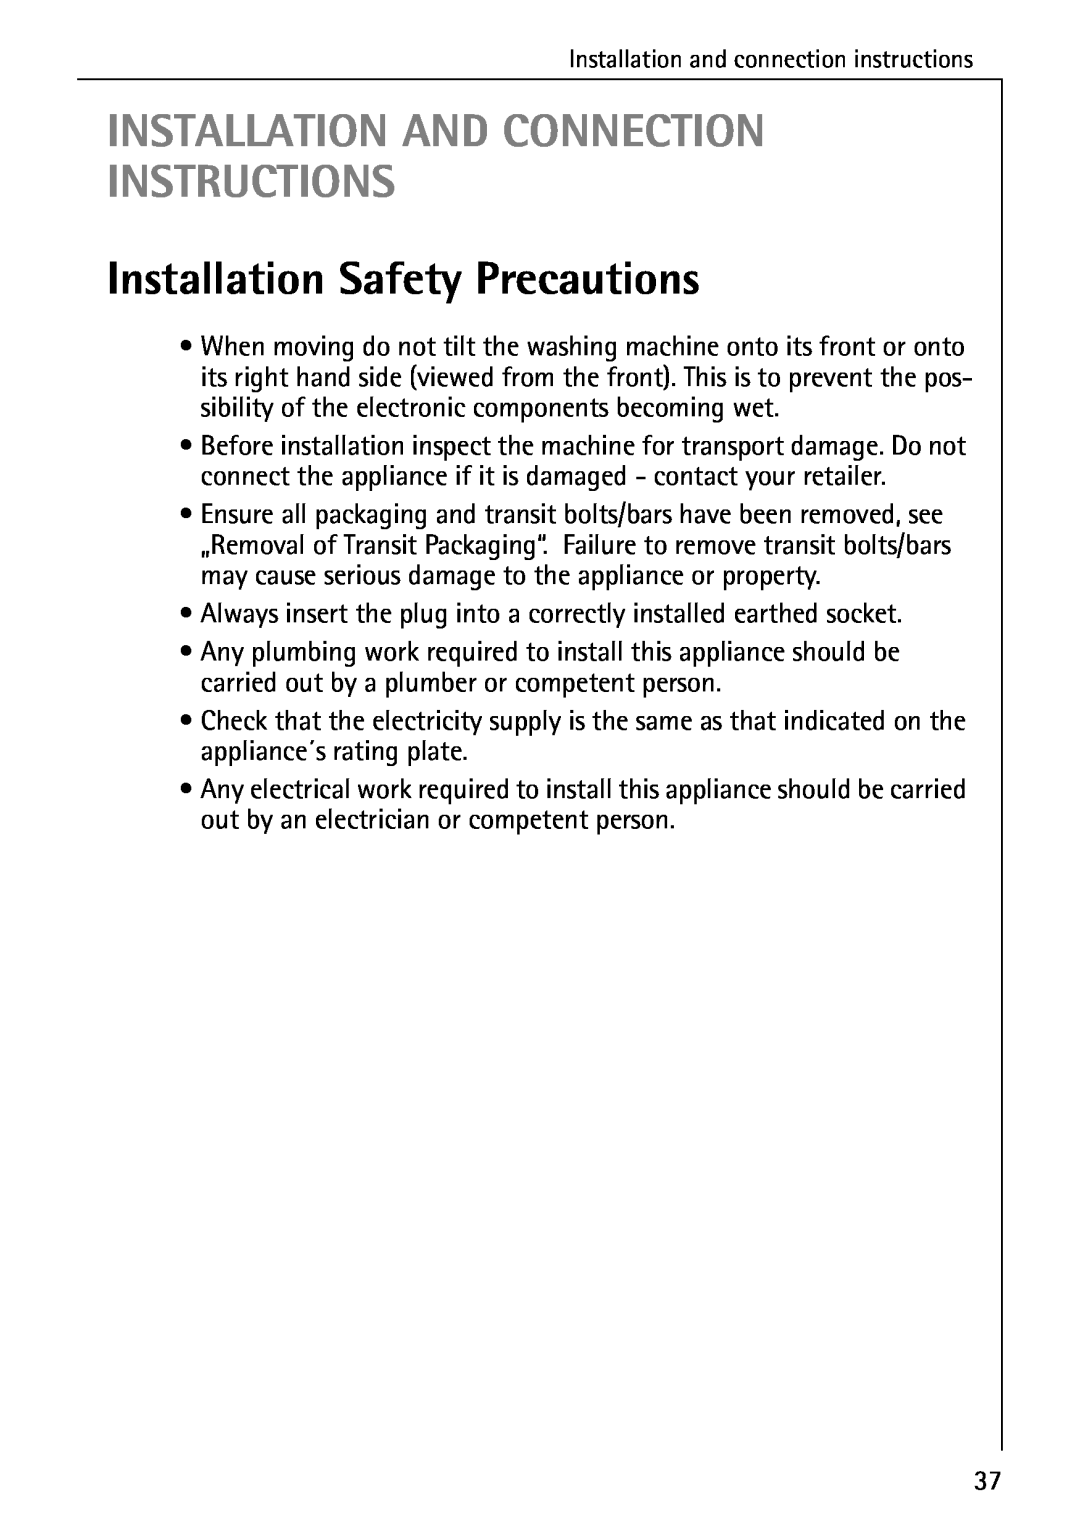 Electrolux 76639 manual Installation And Connection Instructions, Installation Safety Precautions 